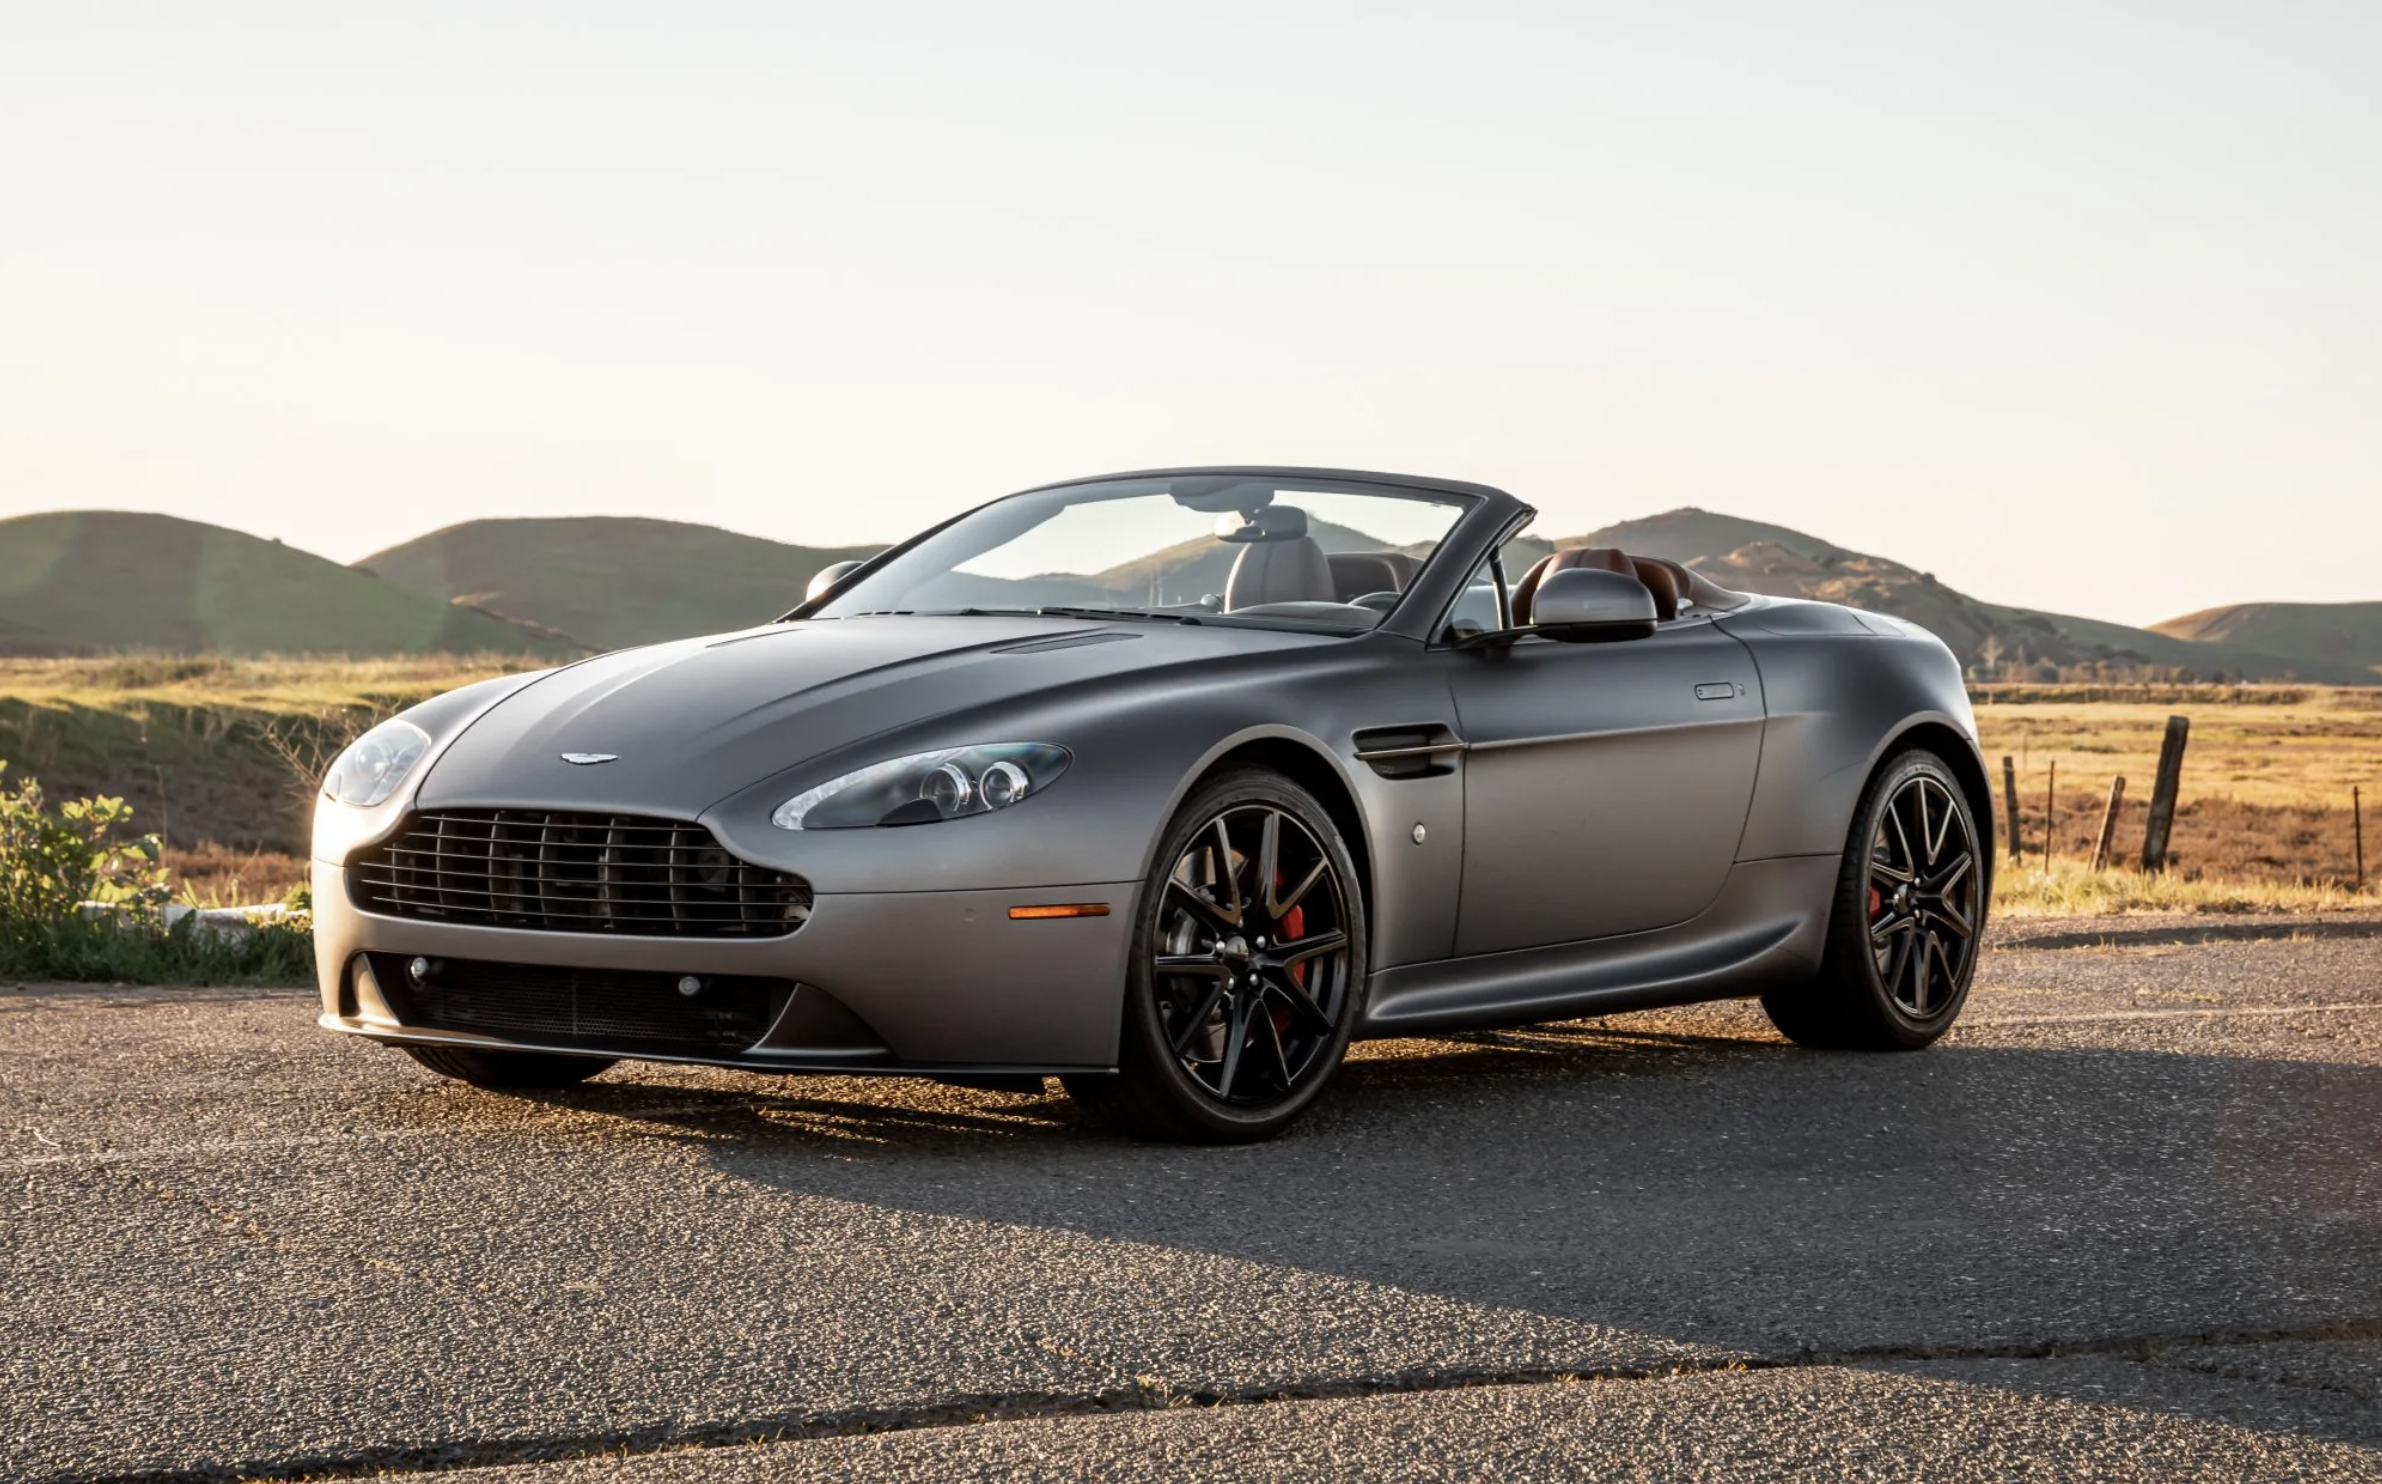 2014 Aston Martin V8 Vantage Is Our Bring a Trailer Auction Pick